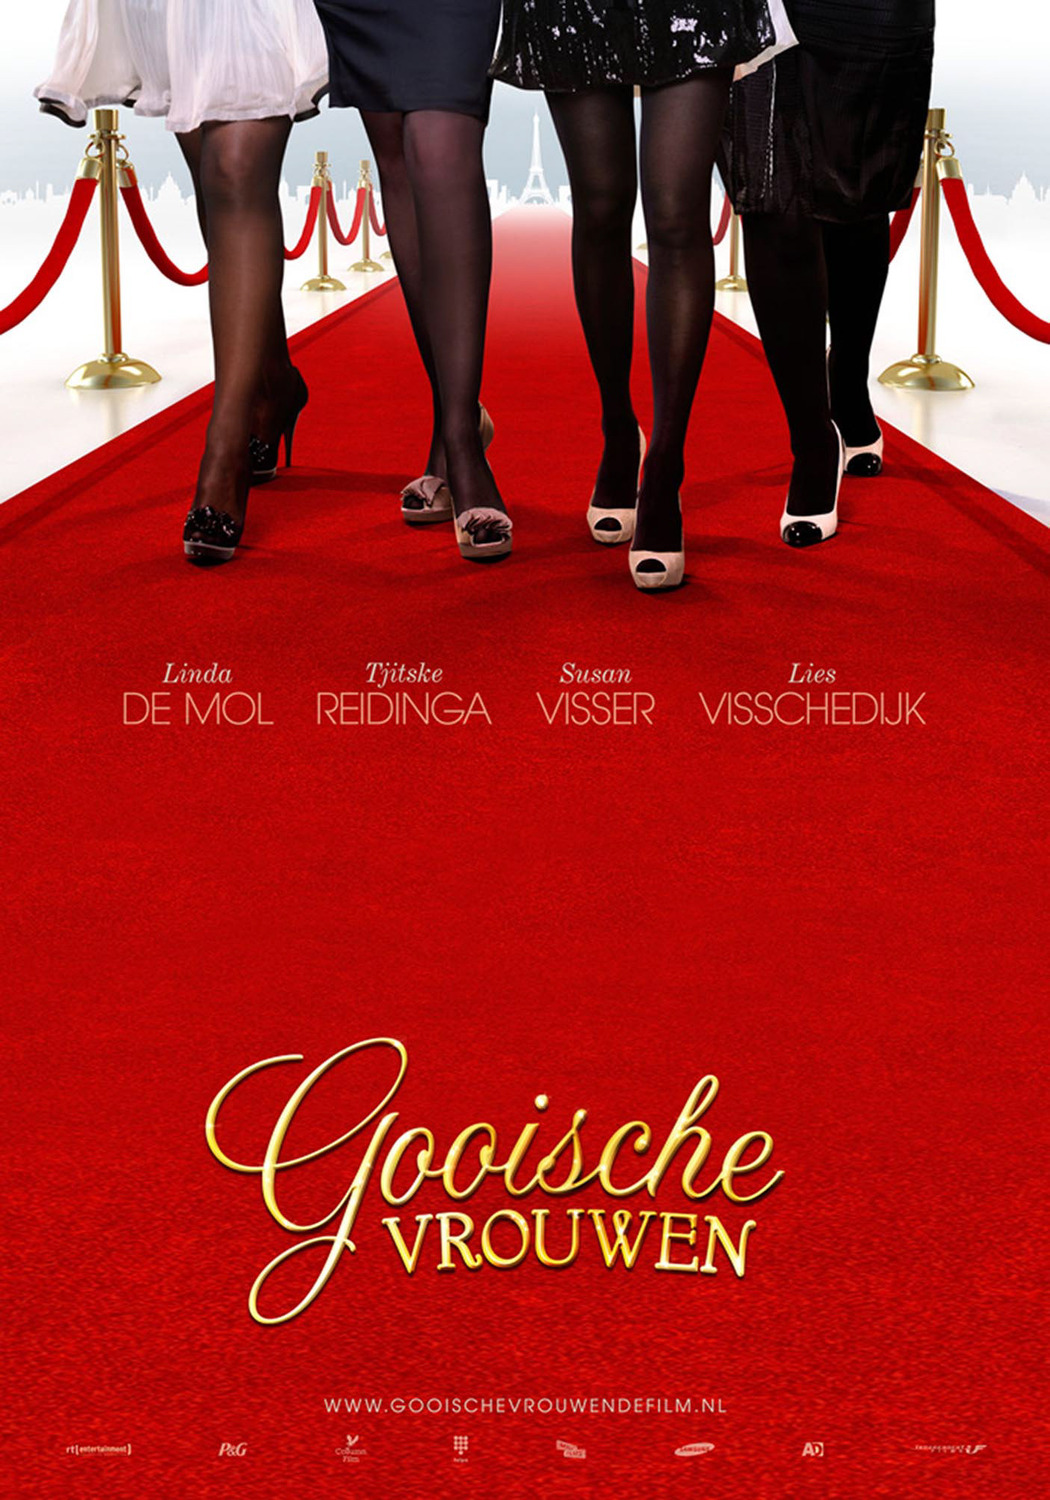 Extra Large Movie Poster Image for Gooische vrouwen (#1 of 3)